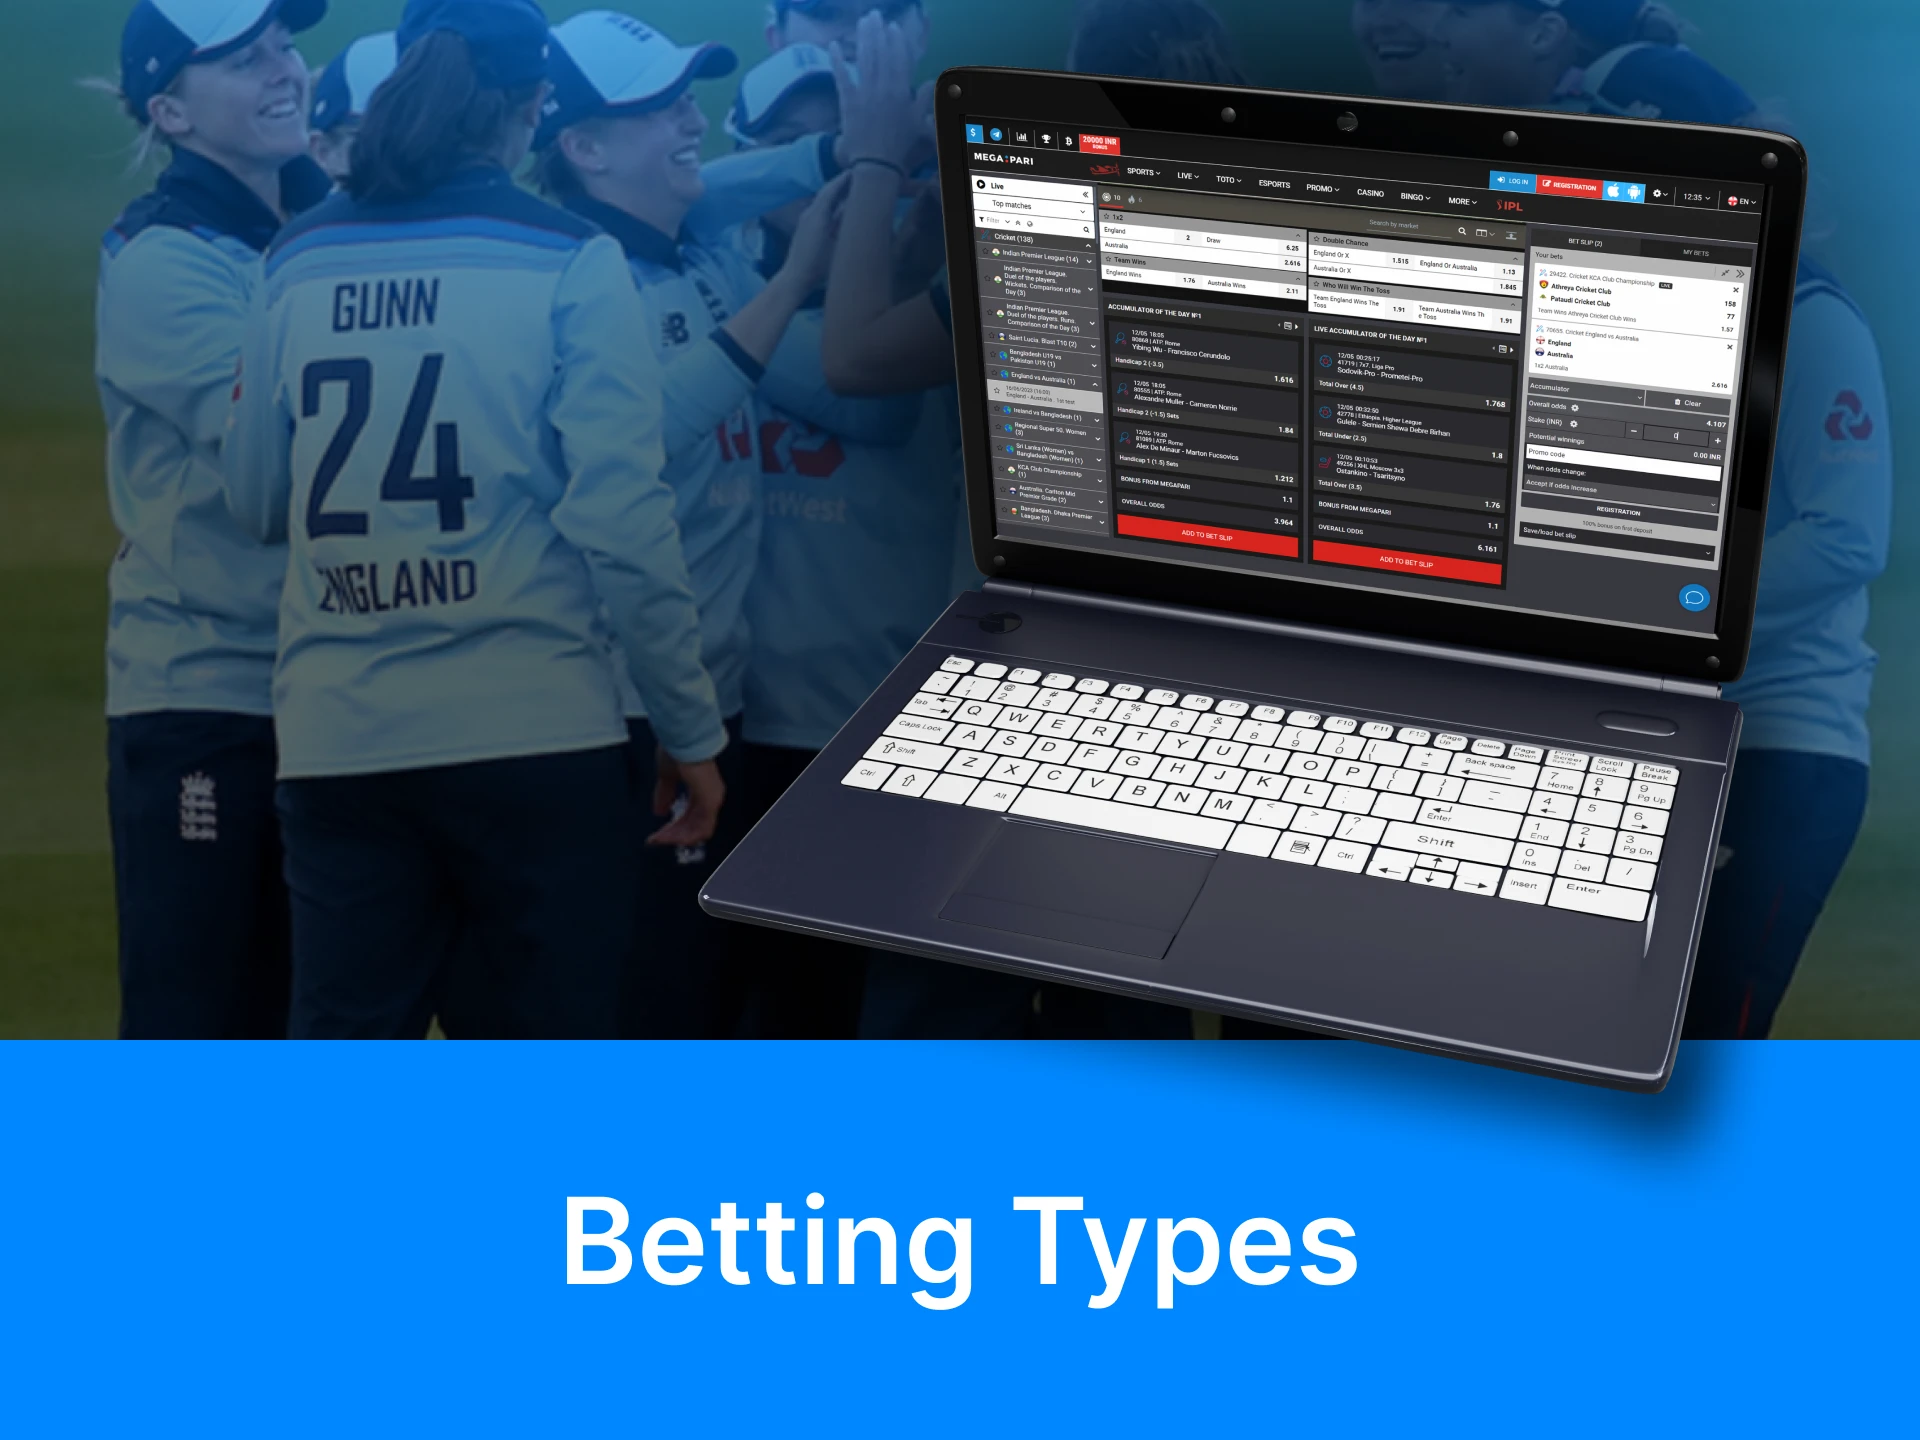 On betting sites, you can place different types of bets on Women's Ashes matches.